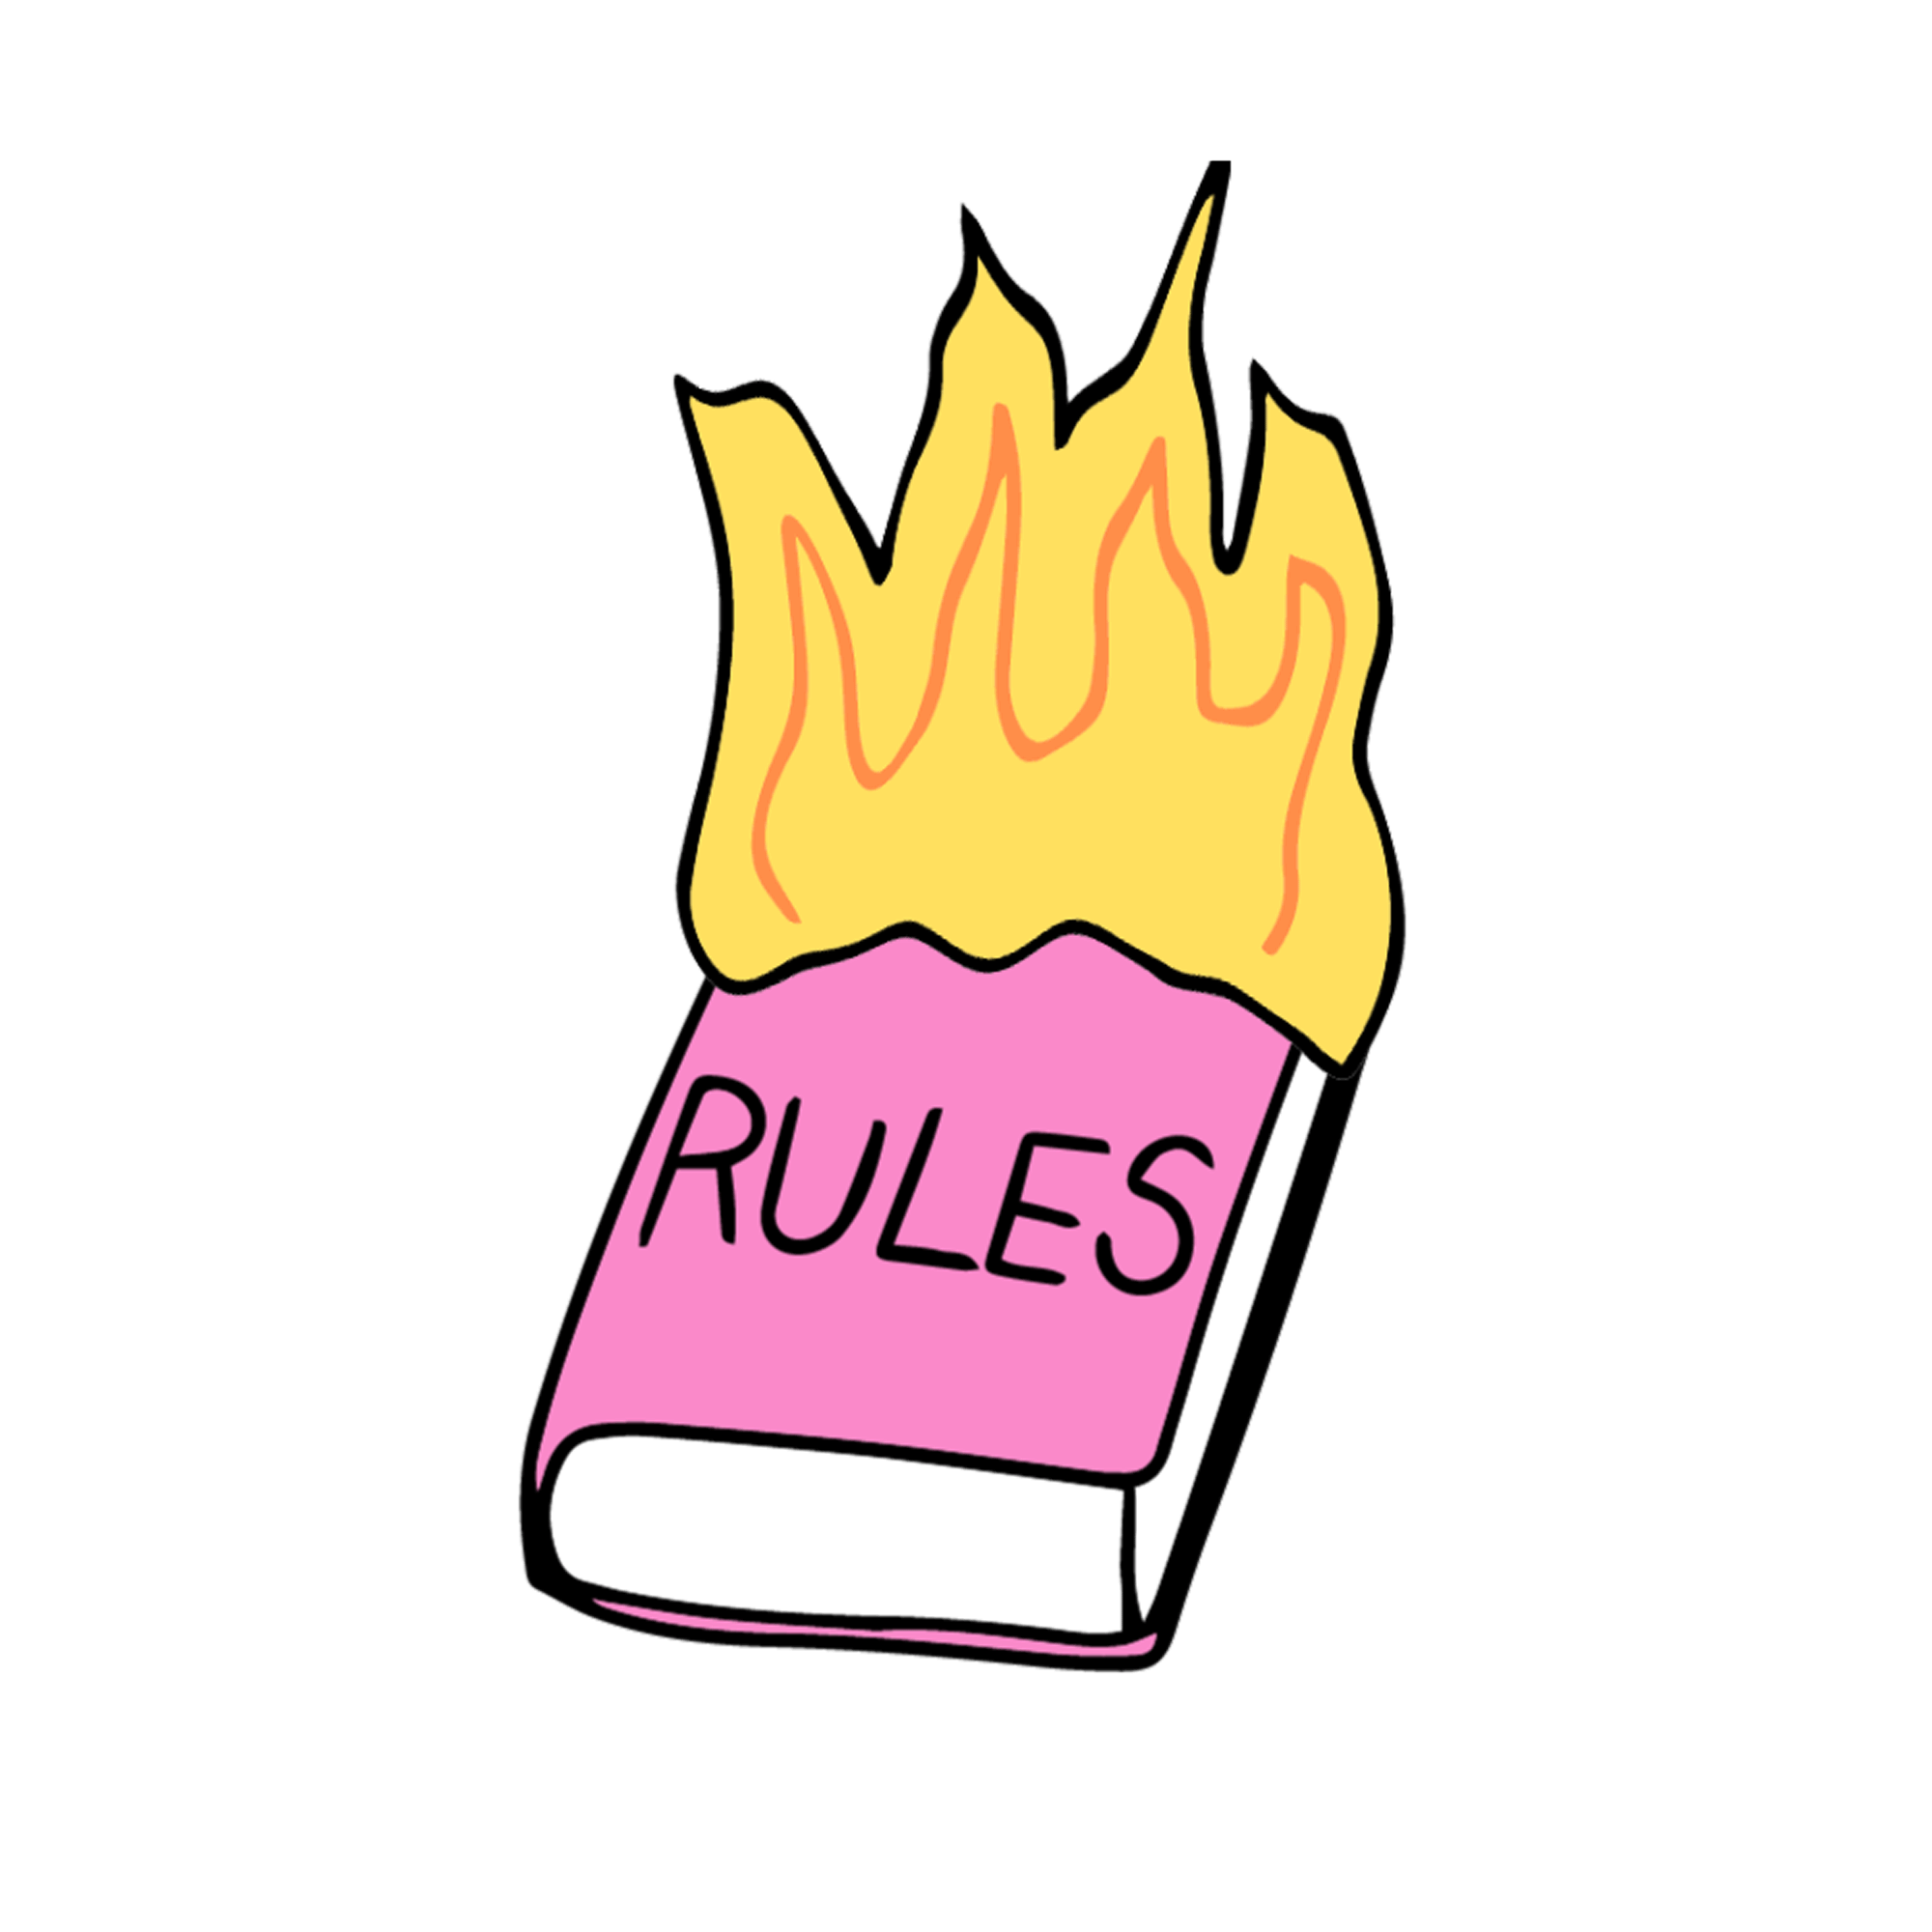 a GIF of a rulebook on fire with flames coming out of it